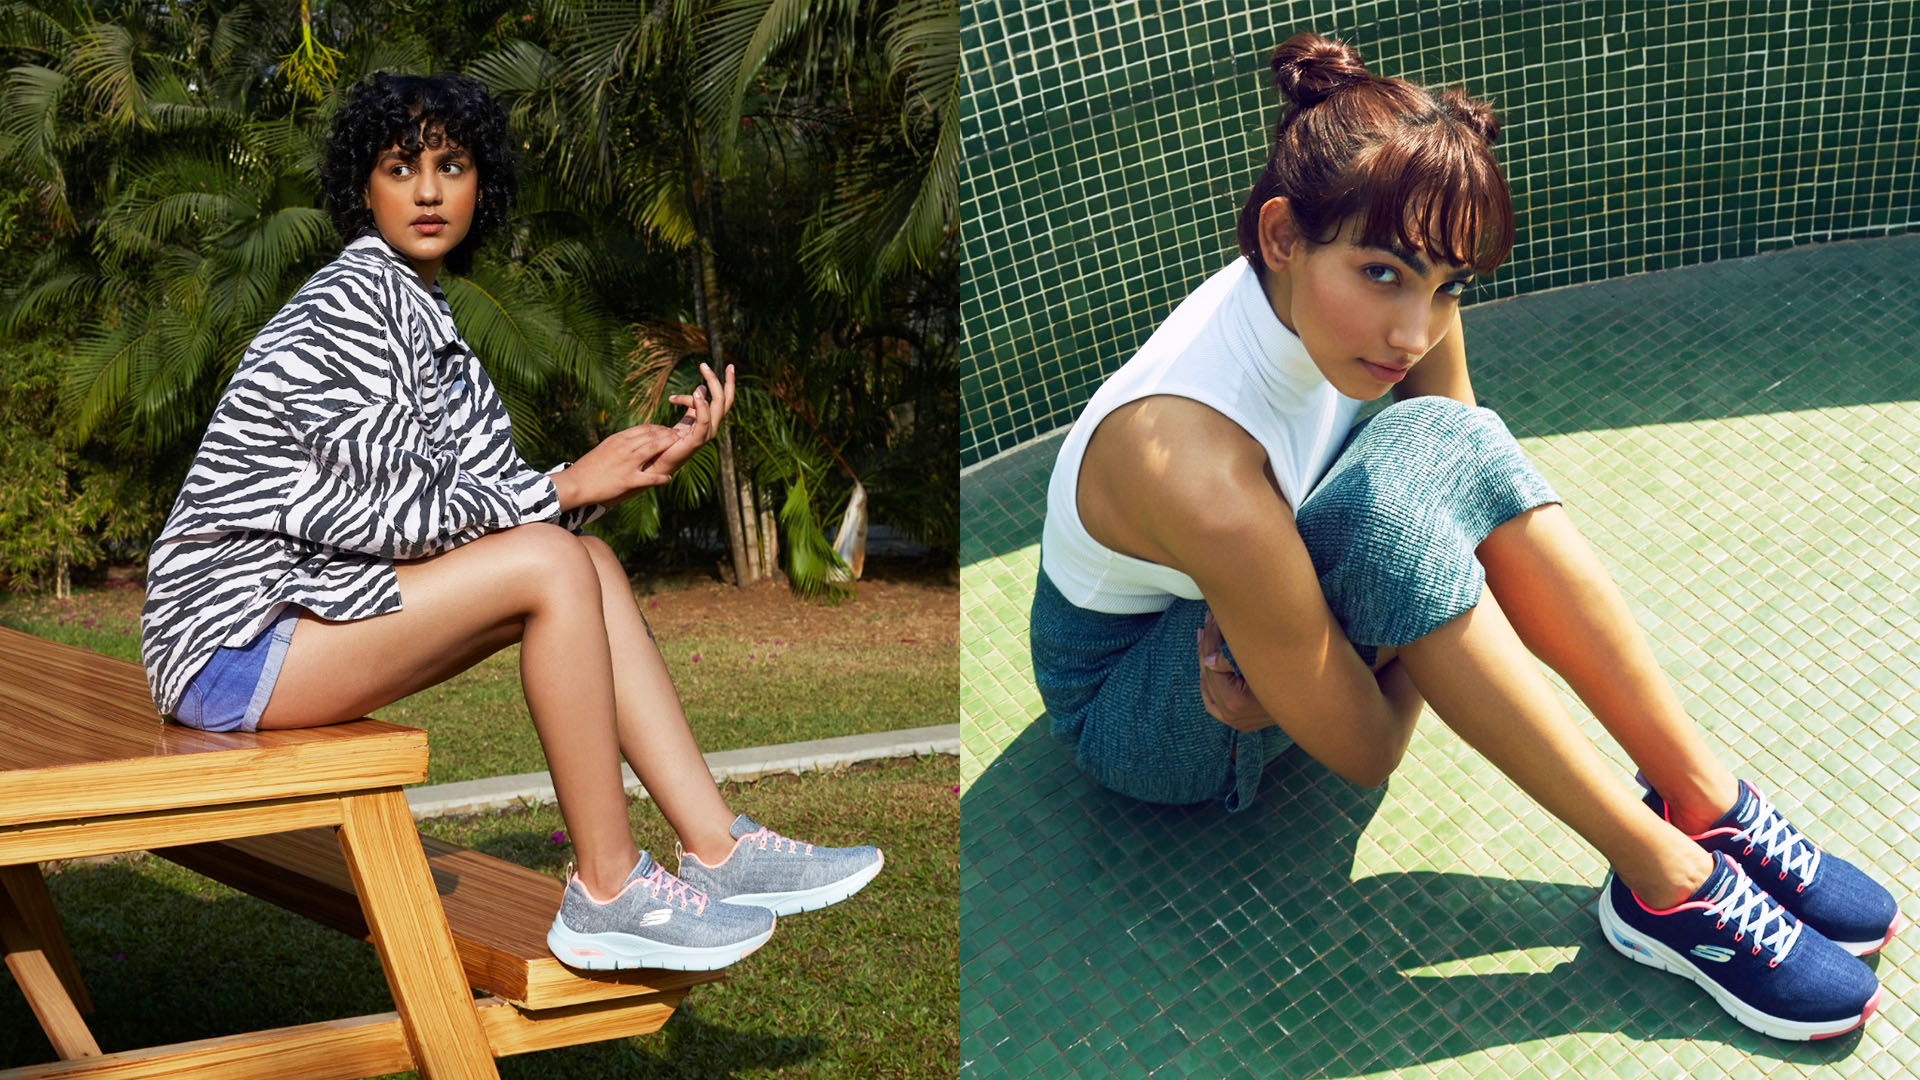 Skechers' Arch Fit Footwear Is Simply Dope Here's Why Your Feet Will Love Em'!